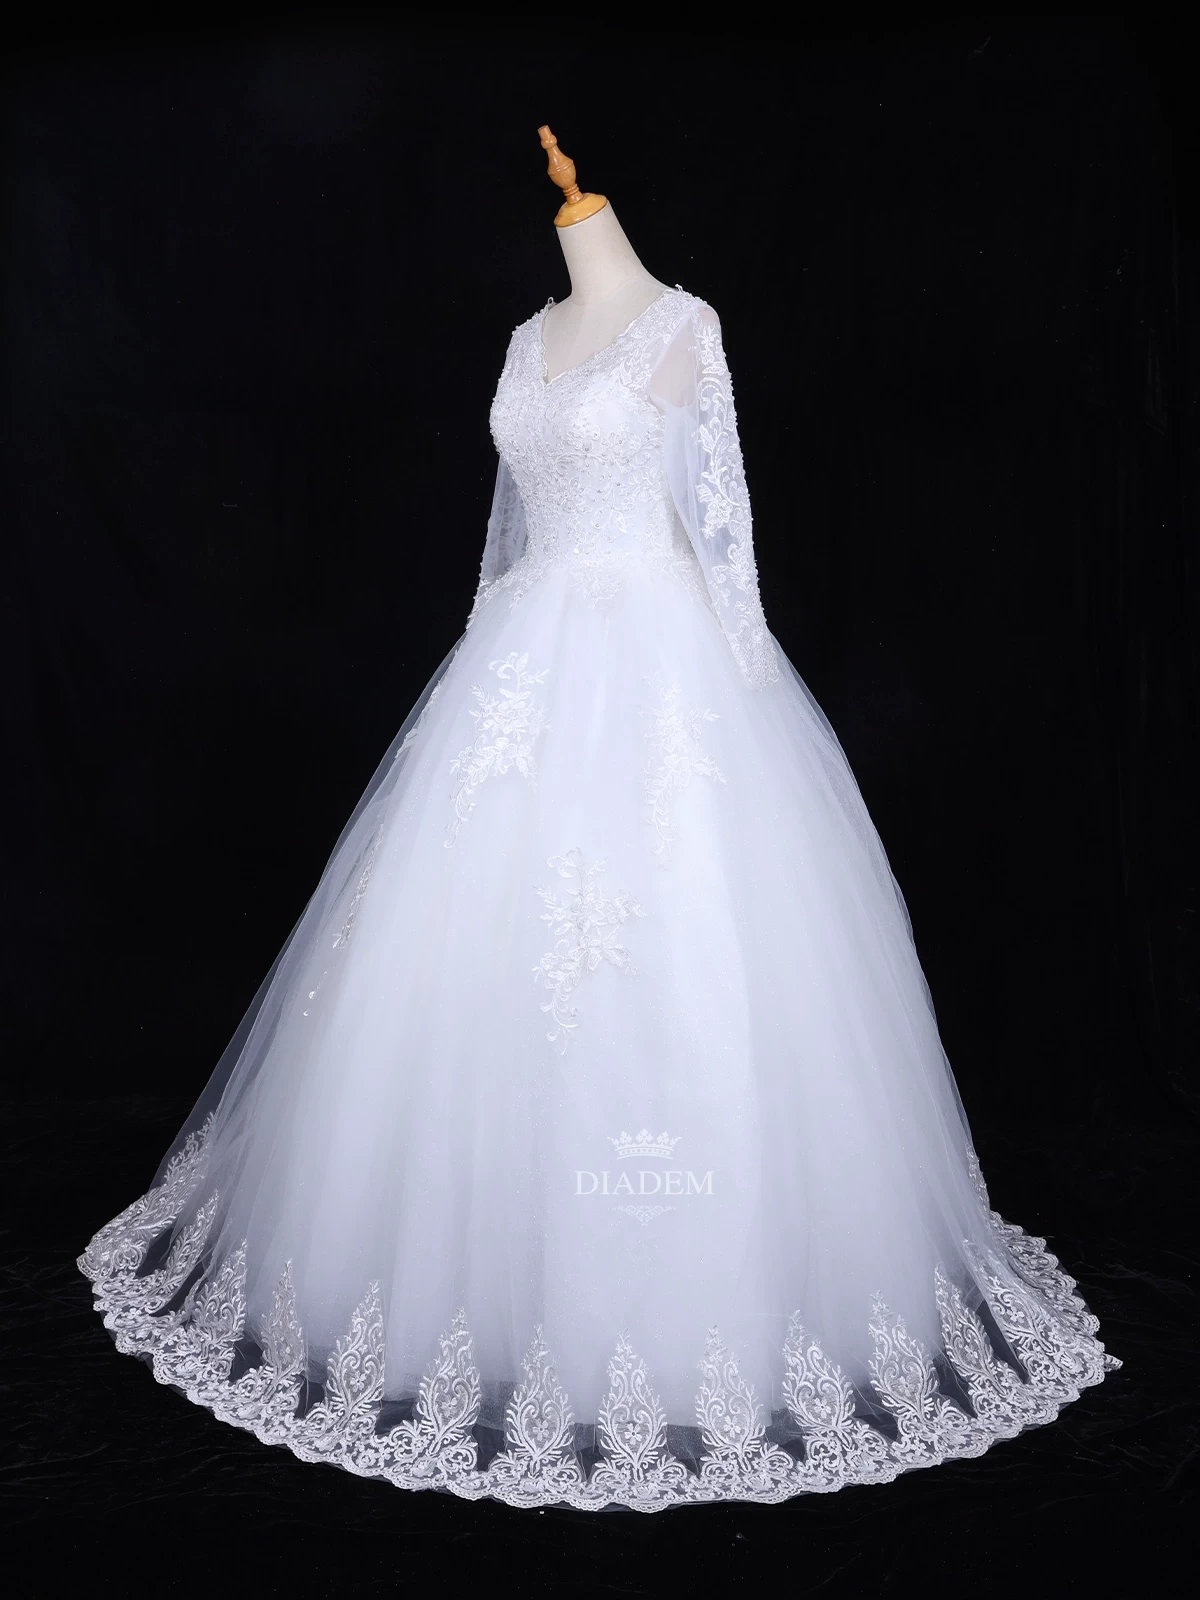 White Net Ball Gown Embellished With Floral Laces And Sequins